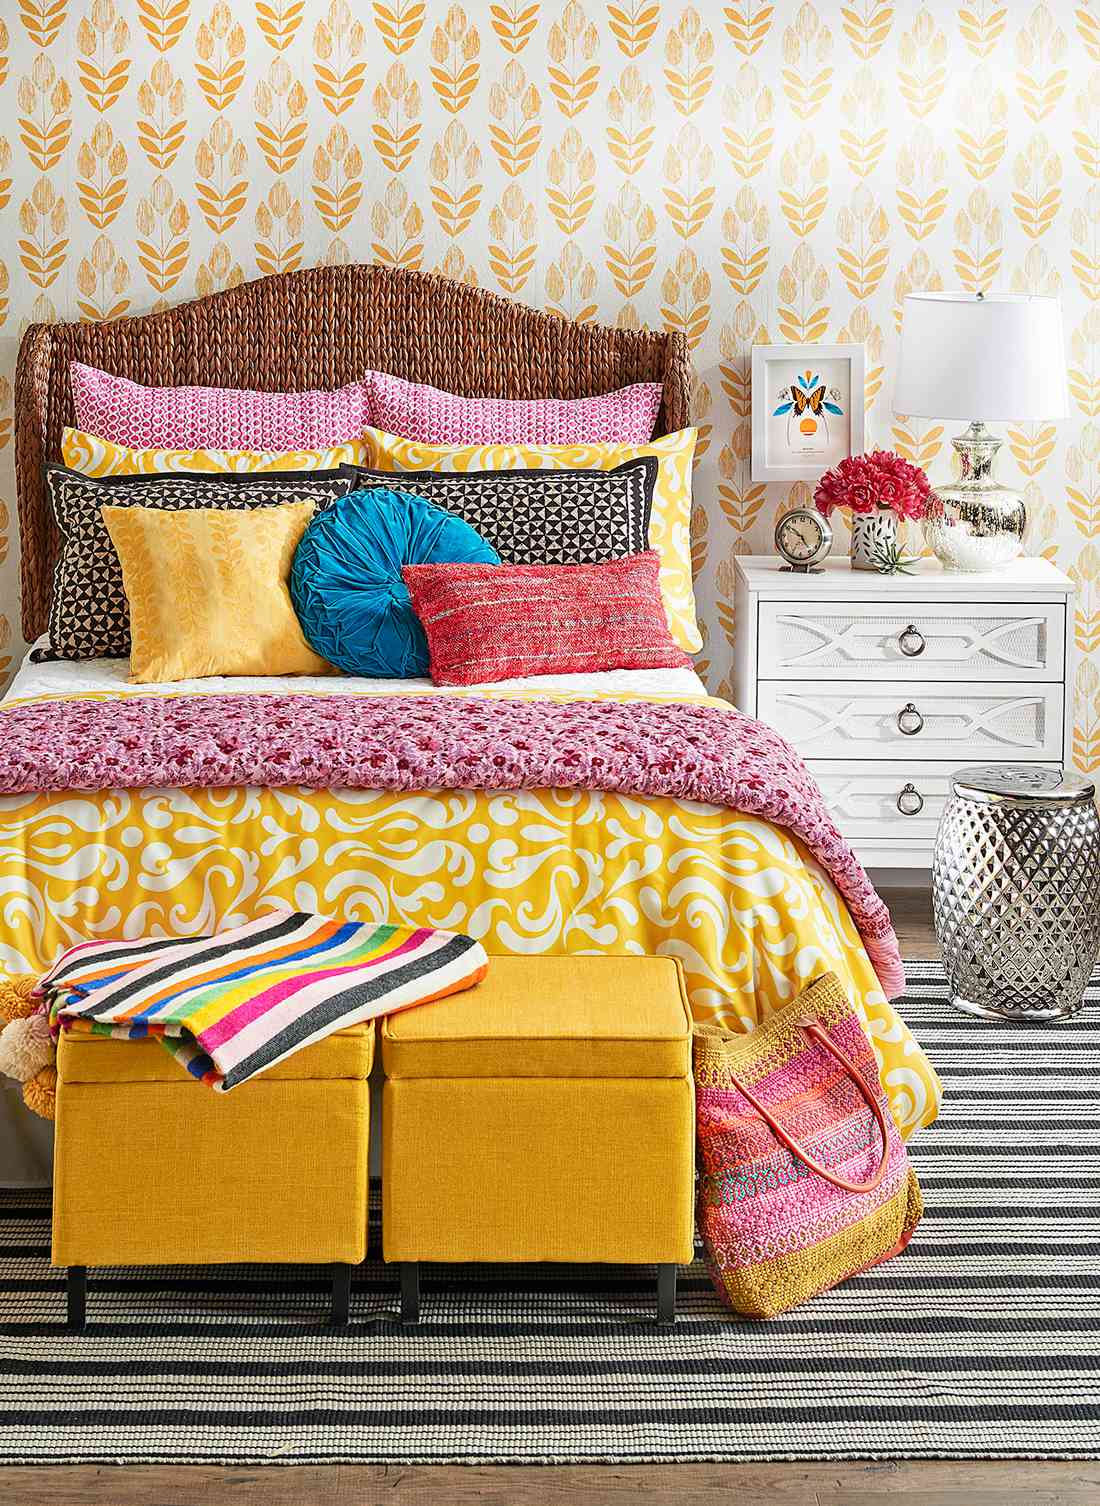 Decorating with Yellow | Better Homes & Gardens